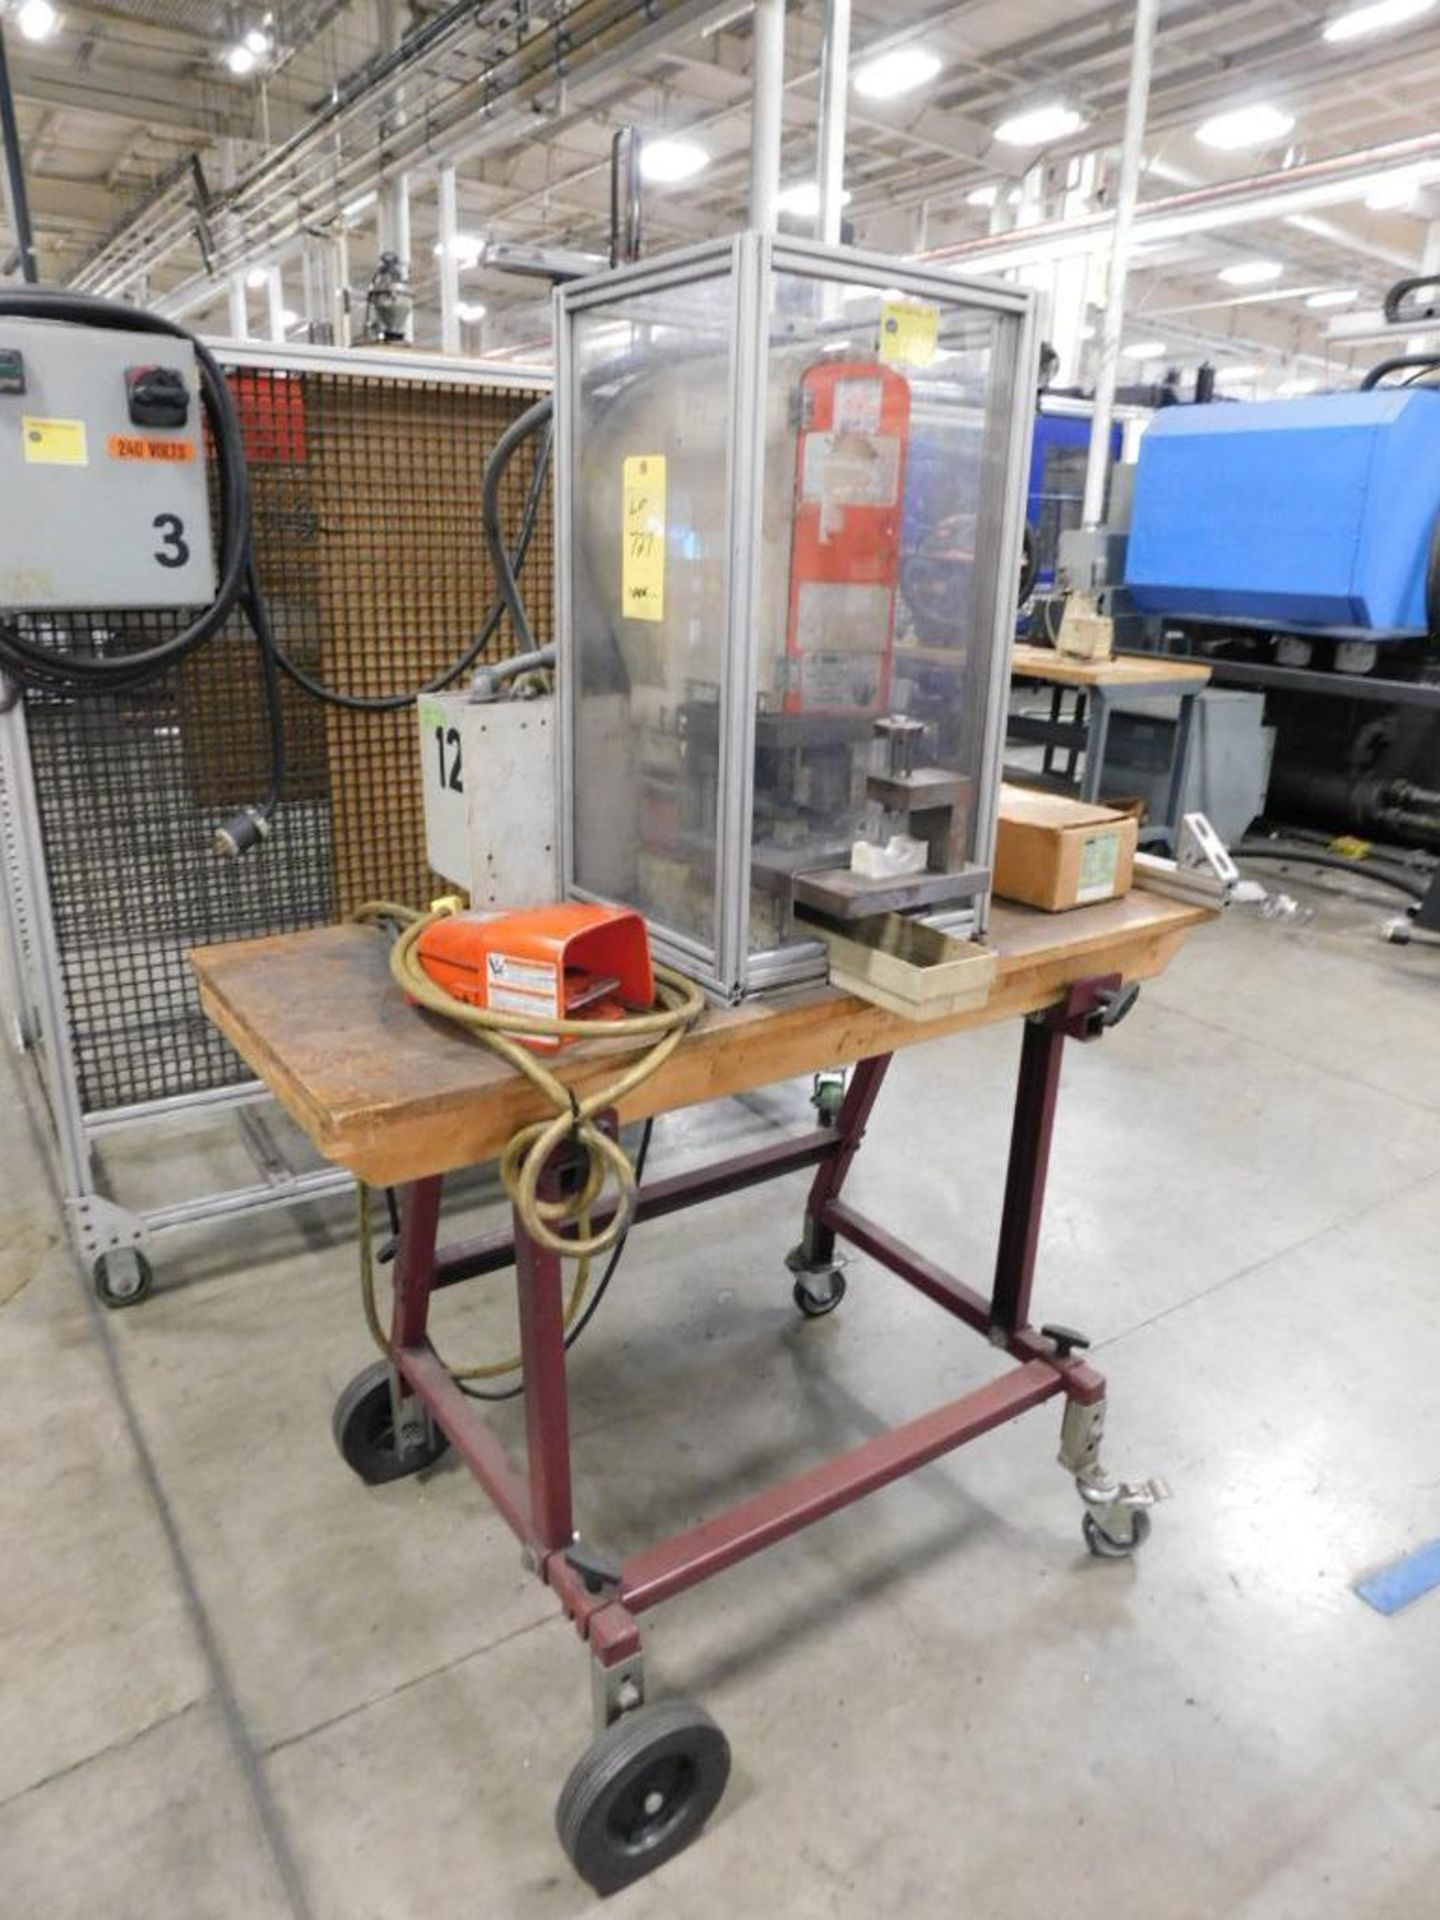 LOT: (8) Work Stations, (2) Punch Presses, (2) Drying Stations, Drilling Station, Glue Station, etc. - Image 7 of 16